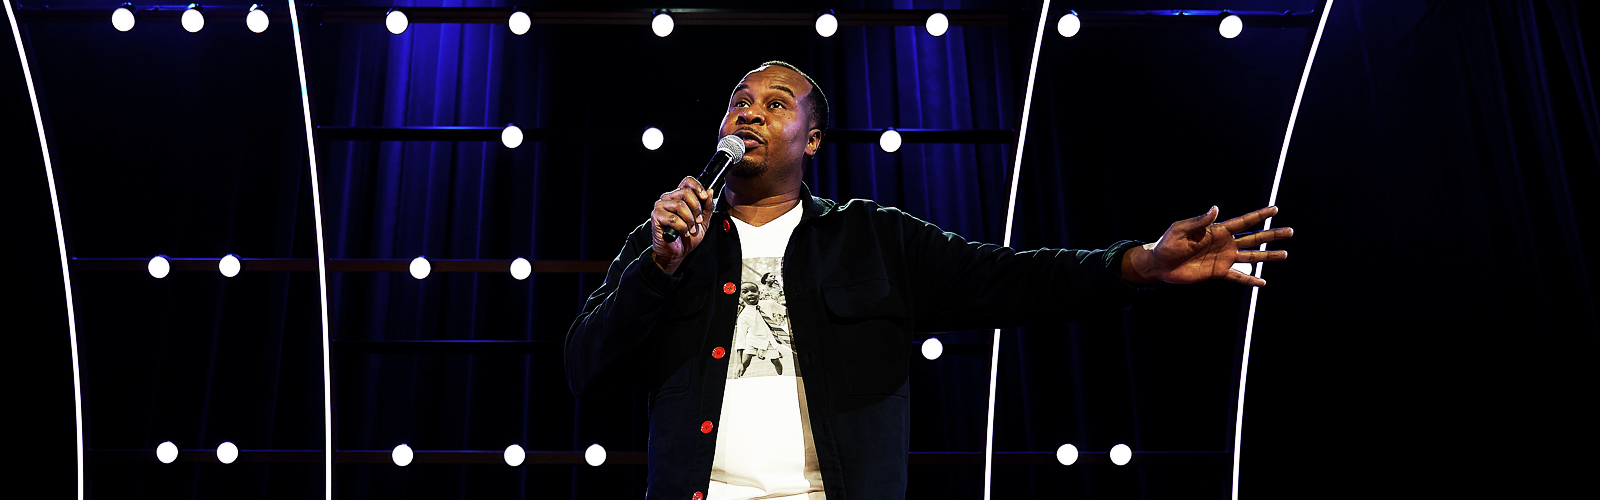 Roy Wood Jr. Talks About ‘Imperfect Messenger’ And Getting More Personal